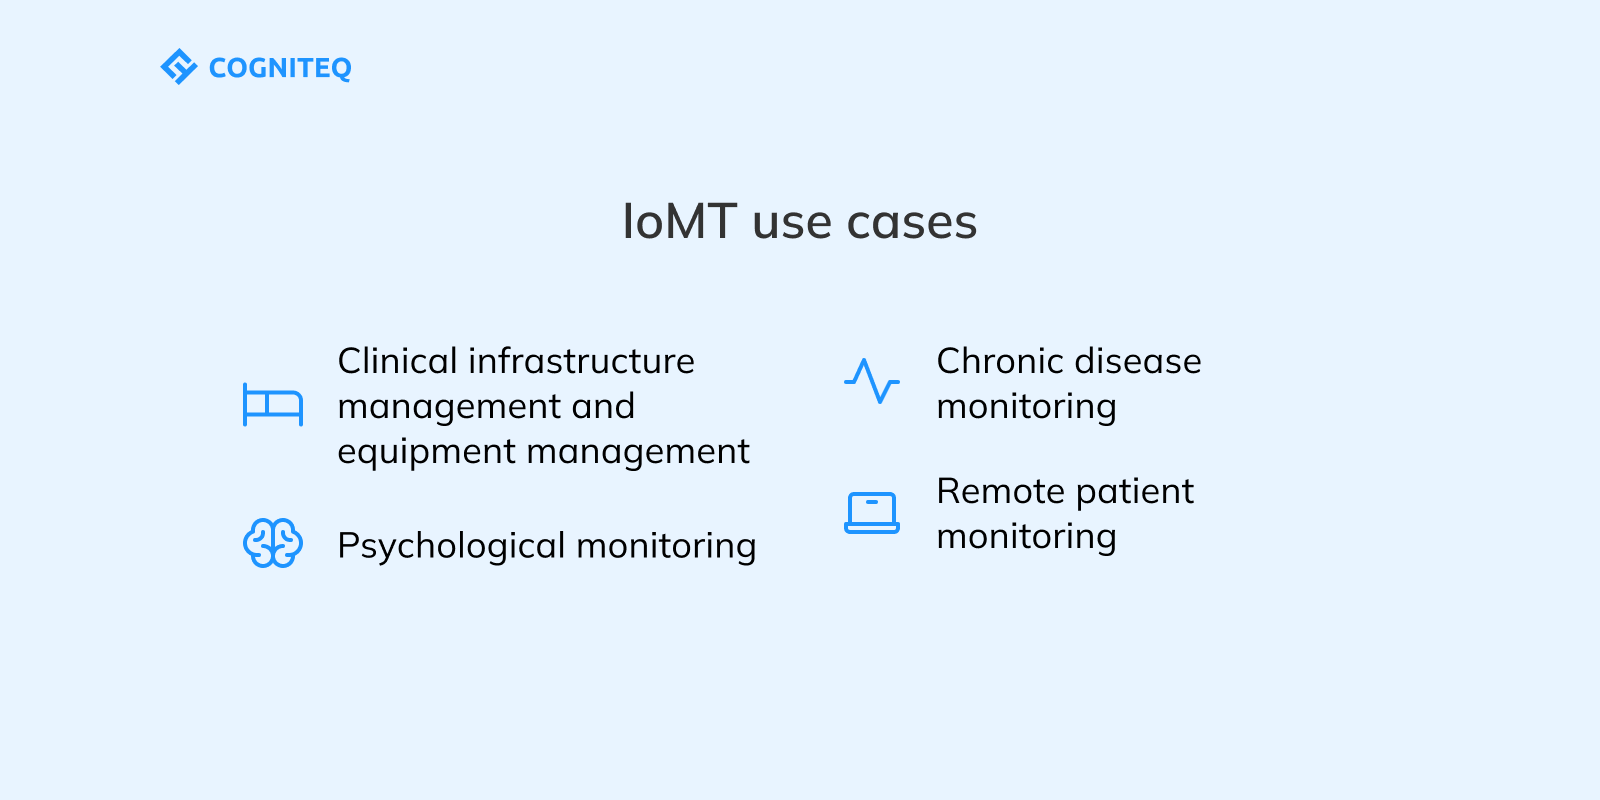 IoMT use cases